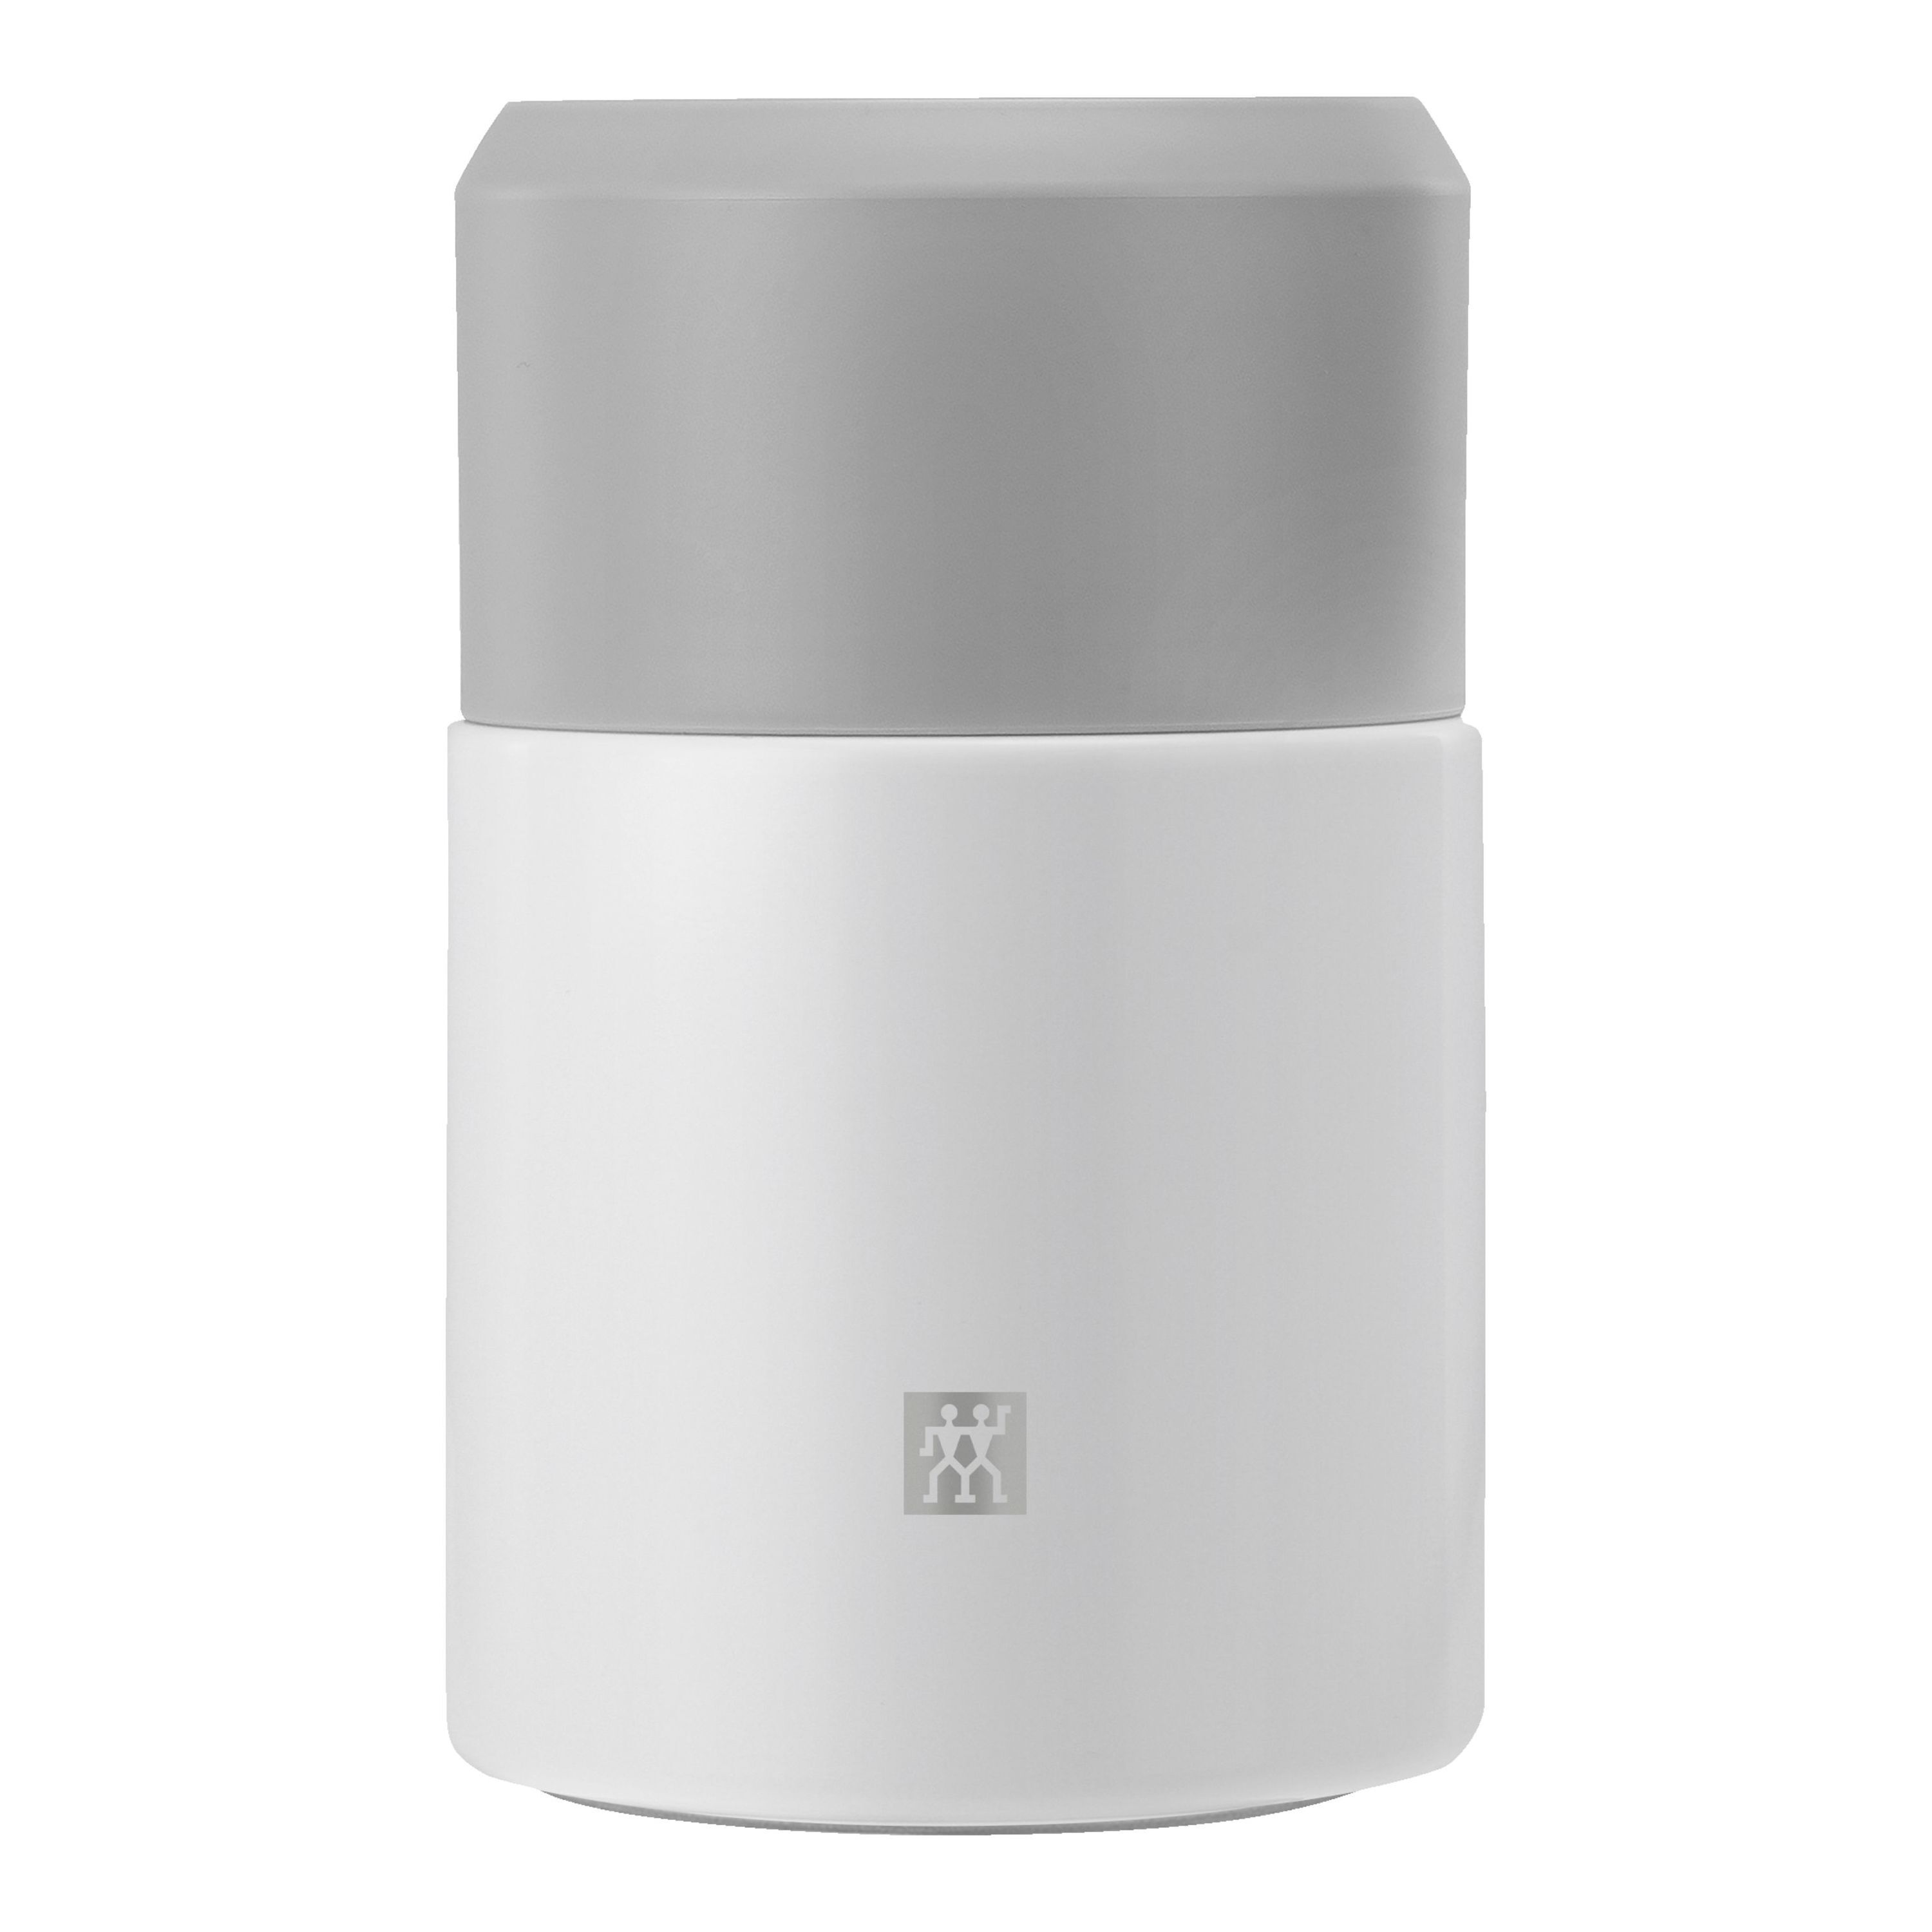 ZWILLING Thermo Contenant alimentaire isotherme, 700 ml, Acier inoxydable, Blanc-Gris